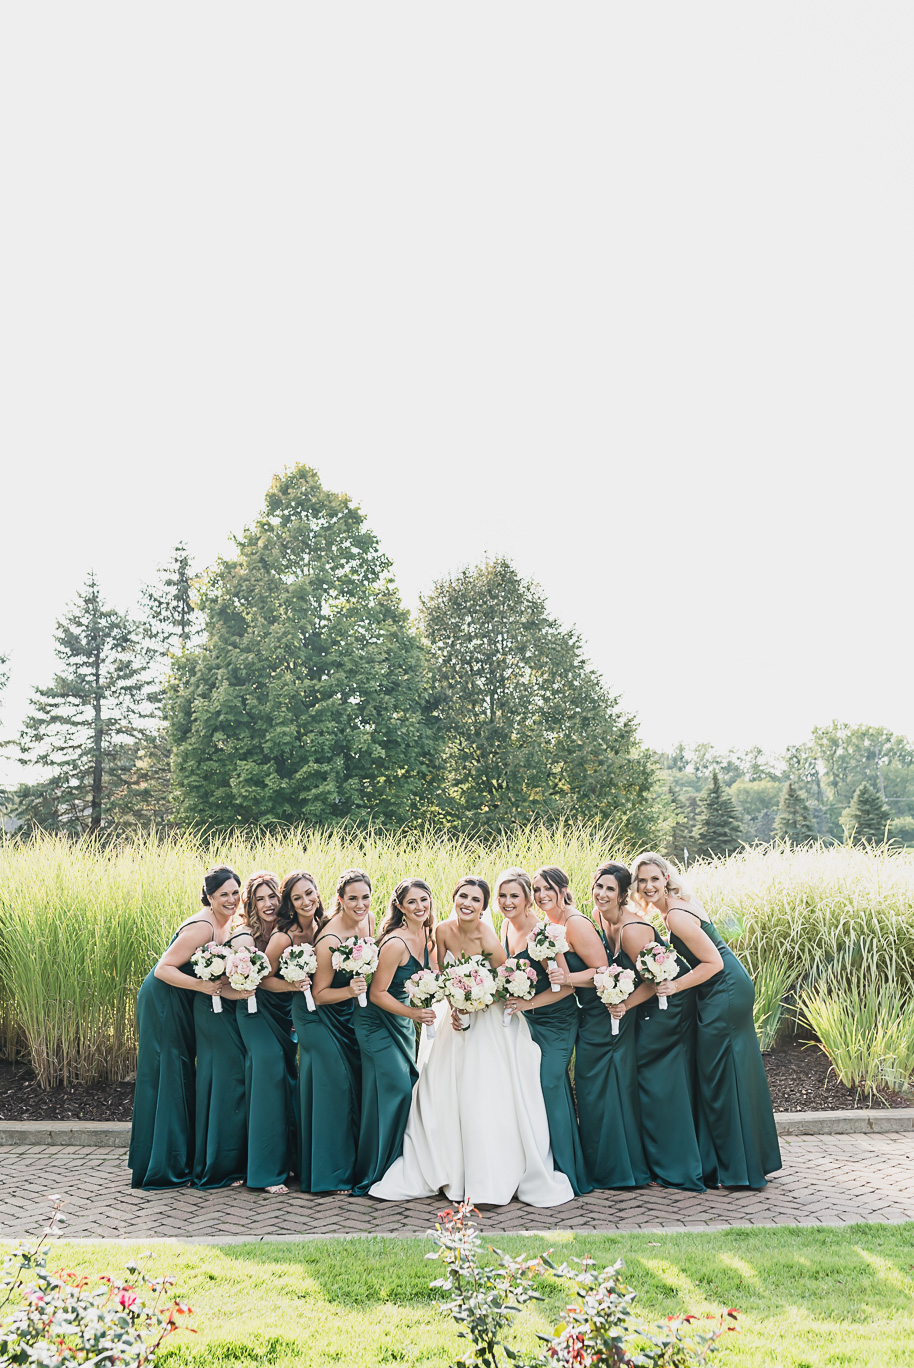 Emerald green and black summer Great Oaks Country Club wedding in Rochester, Michigan provided by Kari Dawson, top-rated Rochester wedding photographer and her team.